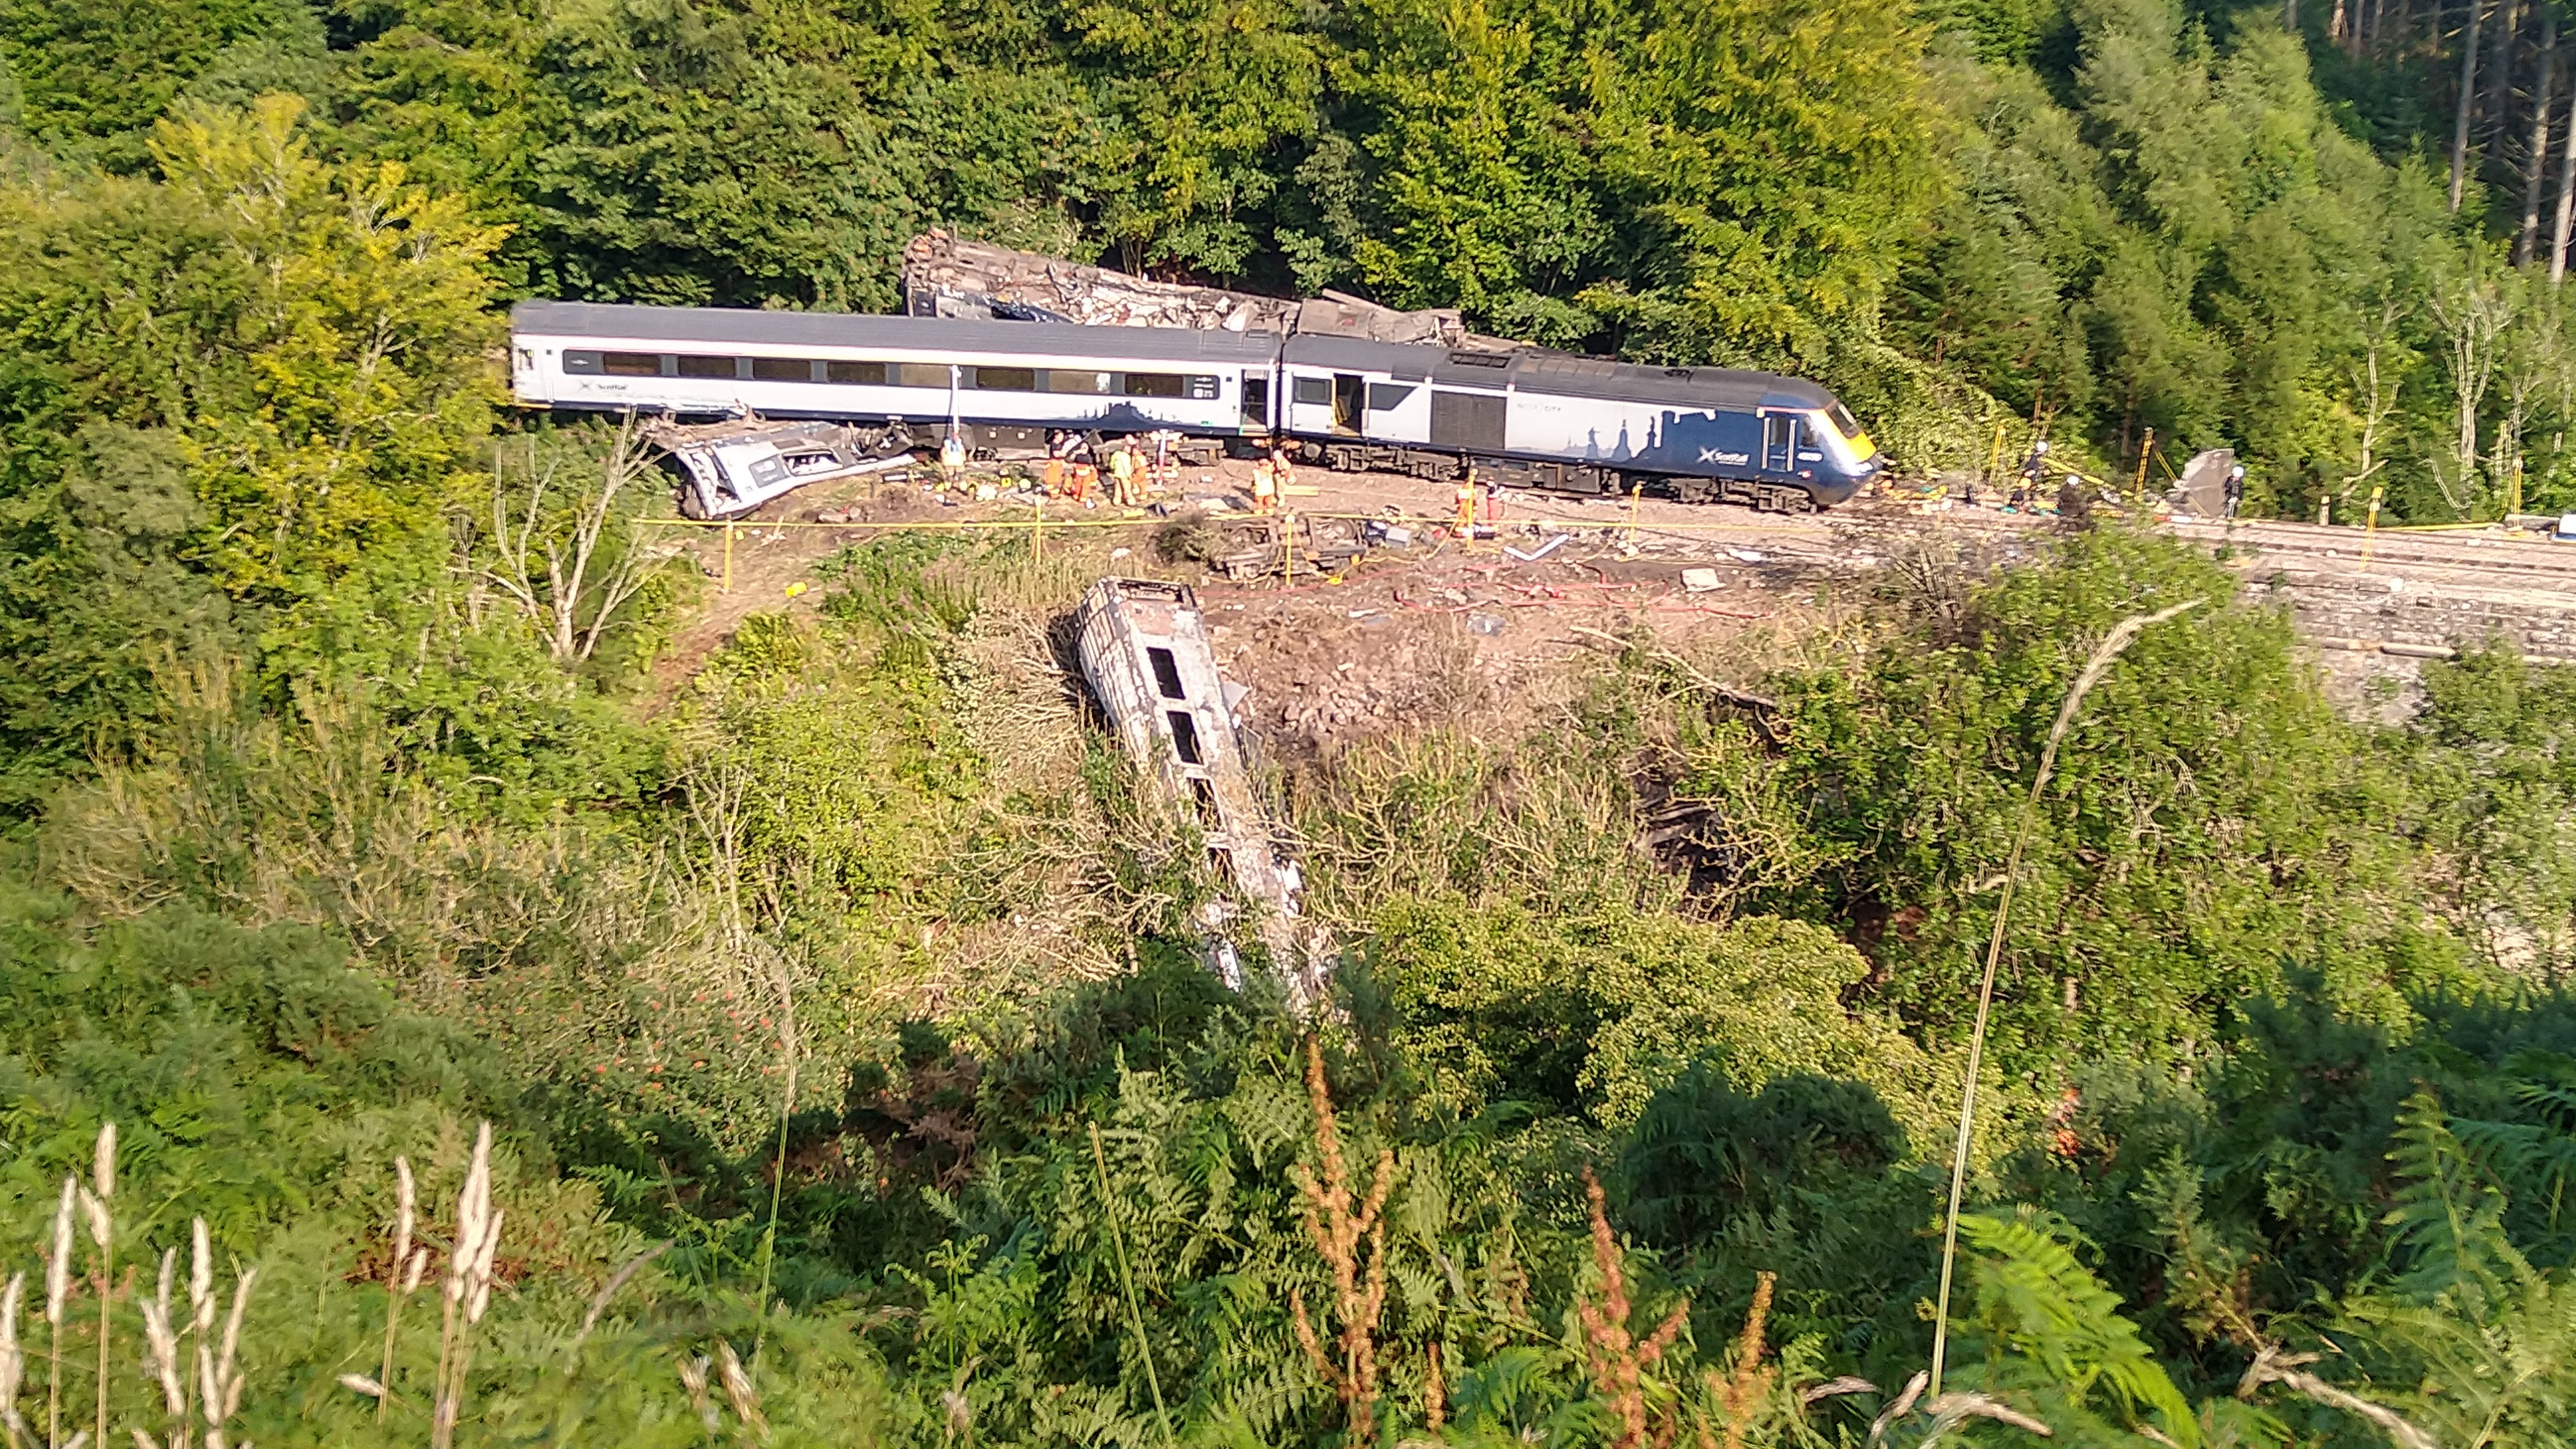 Carmont Rail Crash When faced with such tragedy Wednesday 12 Aug 2020